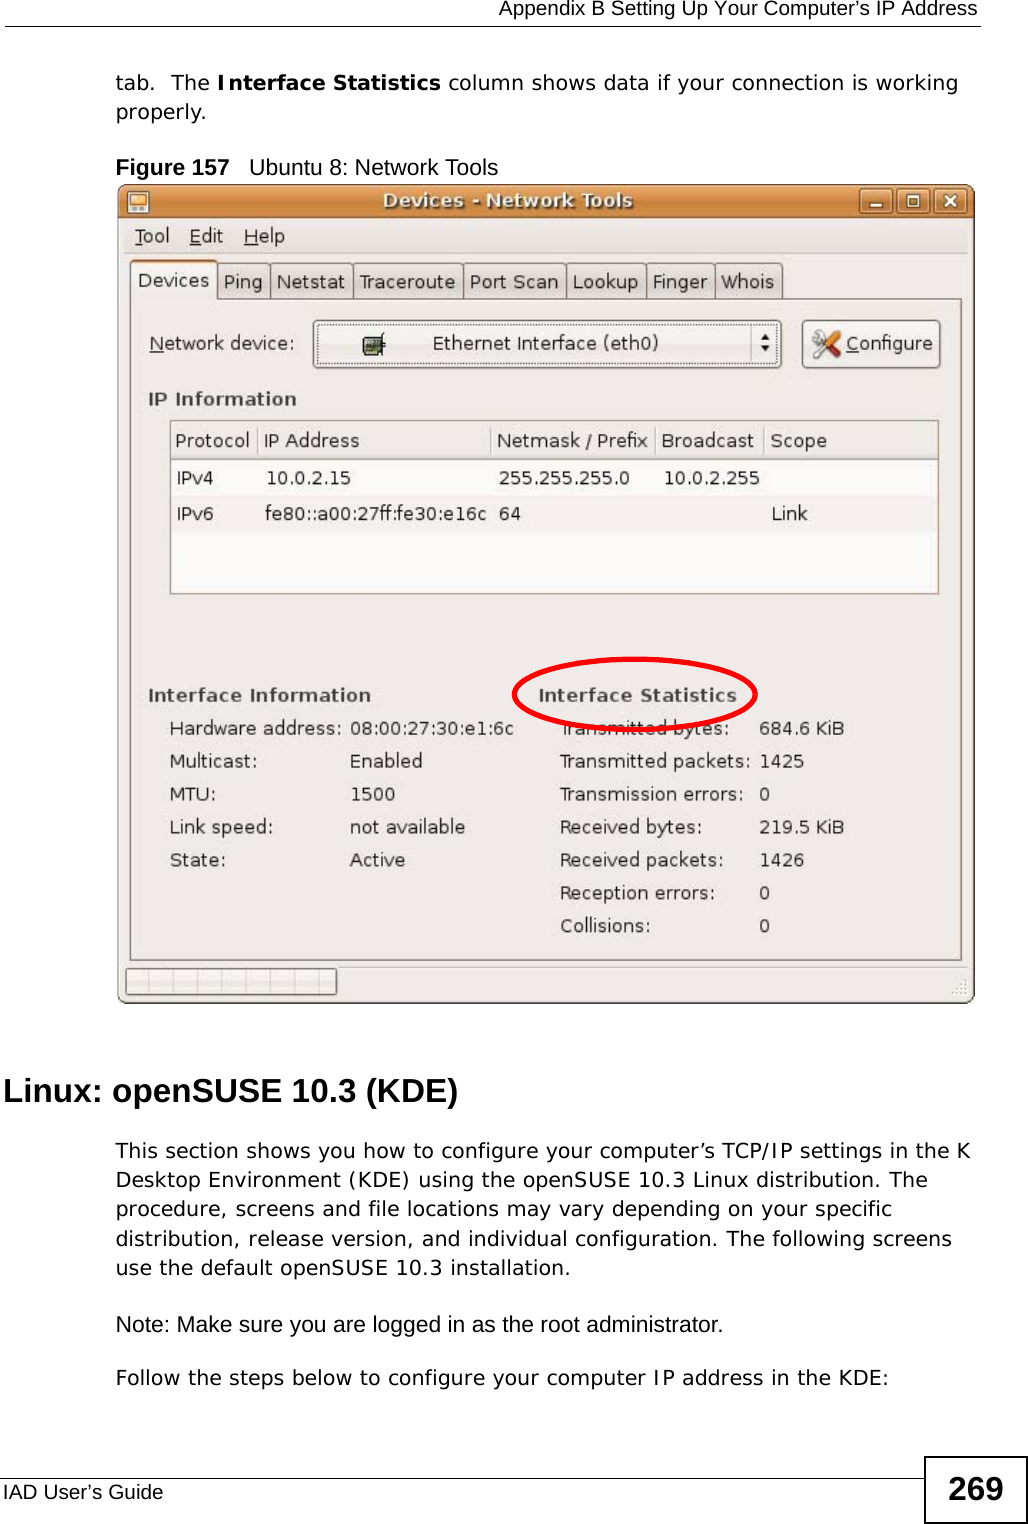  Appendix B Setting Up Your Computer’s IP AddressIAD User’s Guide 269tab.  The Interface Statistics column shows data if your connection is working properly.Figure 157   Ubuntu 8: Network ToolsLinux: openSUSE 10.3 (KDE)This section shows you how to configure your computer’s TCP/IP settings in the K Desktop Environment (KDE) using the openSUSE 10.3 Linux distribution. The procedure, screens and file locations may vary depending on your specific distribution, release version, and individual configuration. The following screens use the default openSUSE 10.3 installation.Note: Make sure you are logged in as the root administrator. Follow the steps below to configure your computer IP address in the KDE: